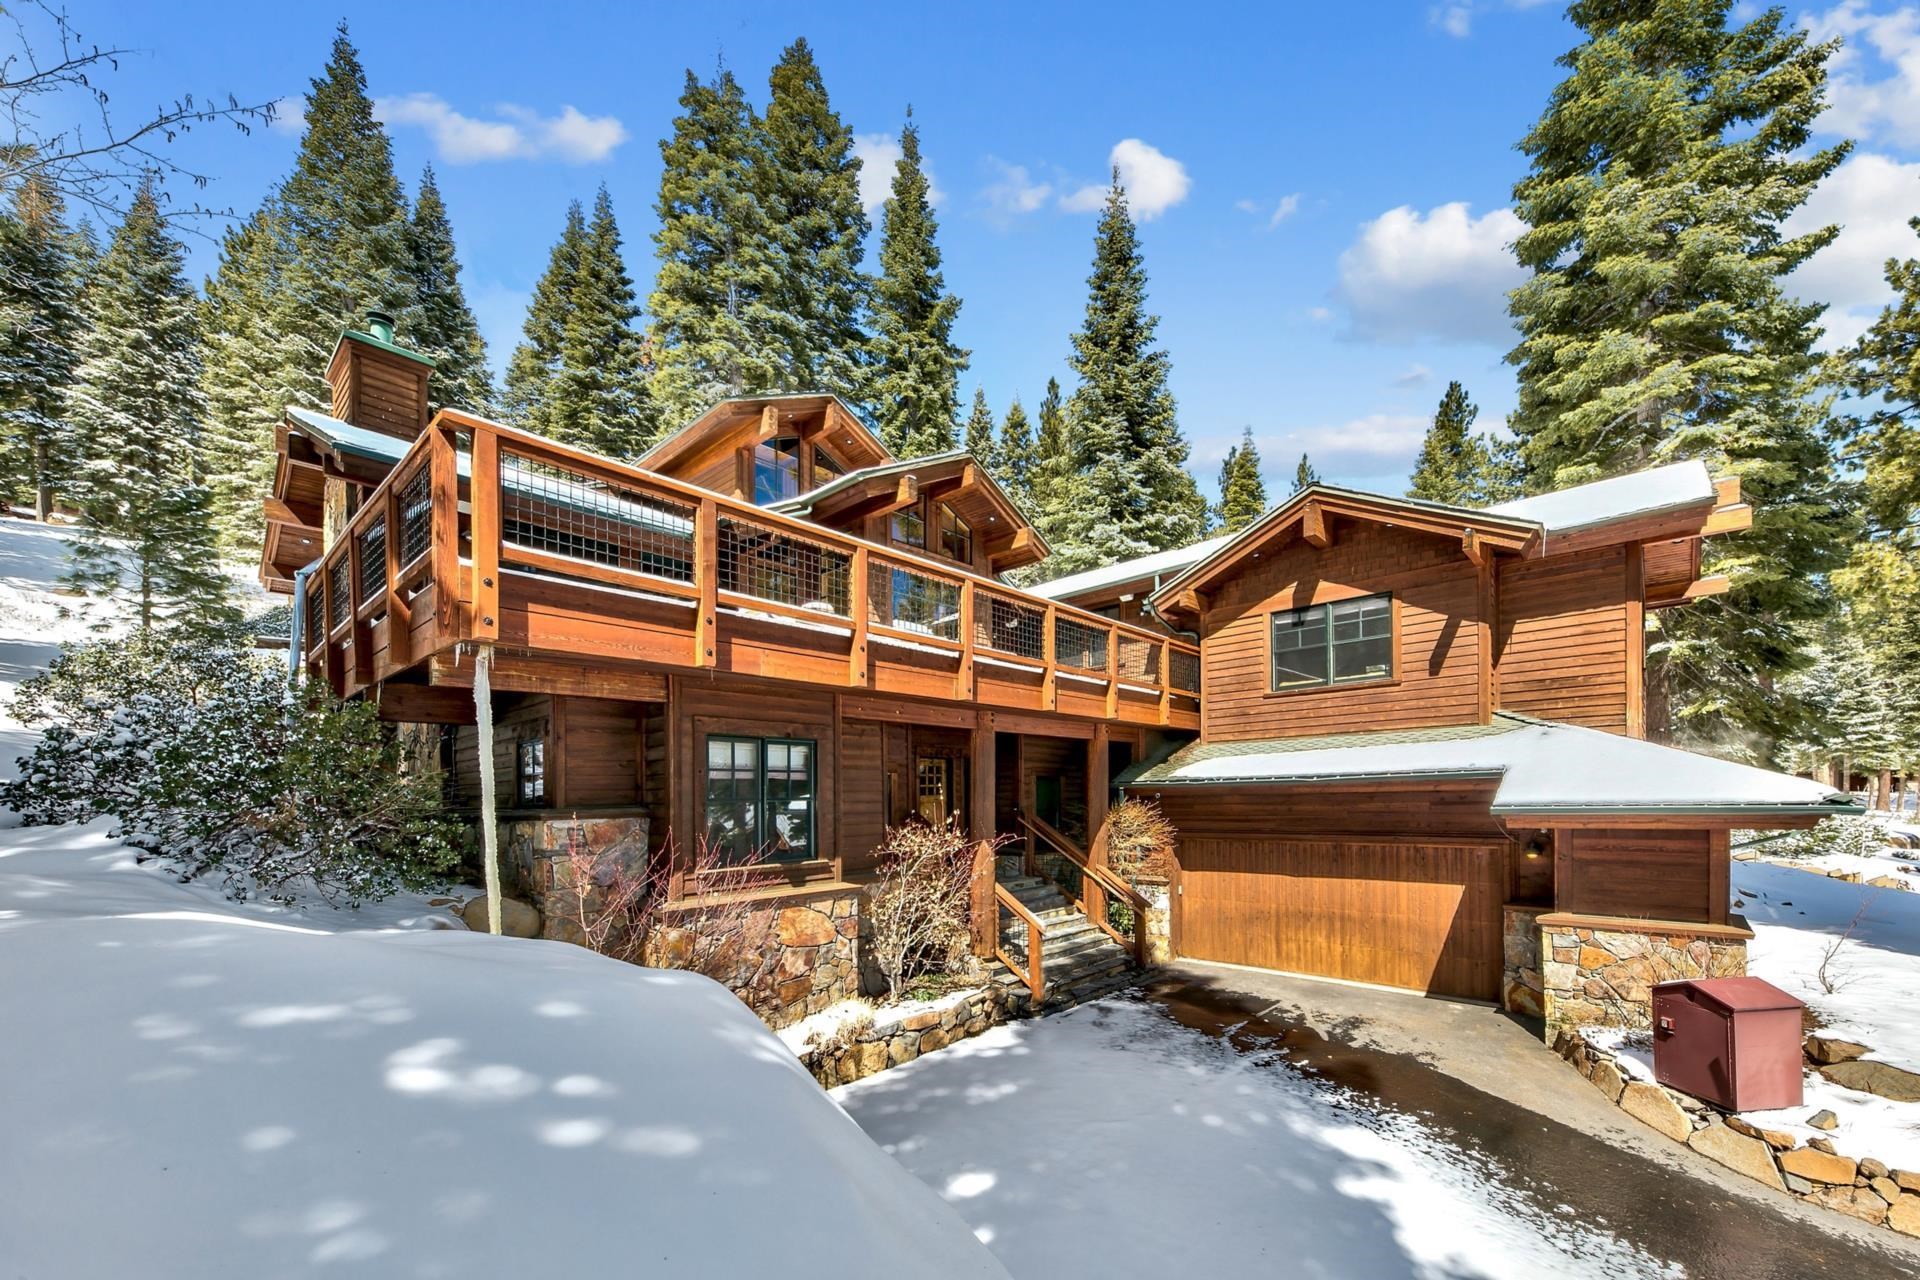 Image for 1768 Grouse Ridge Rd, Truckee, CA 96161